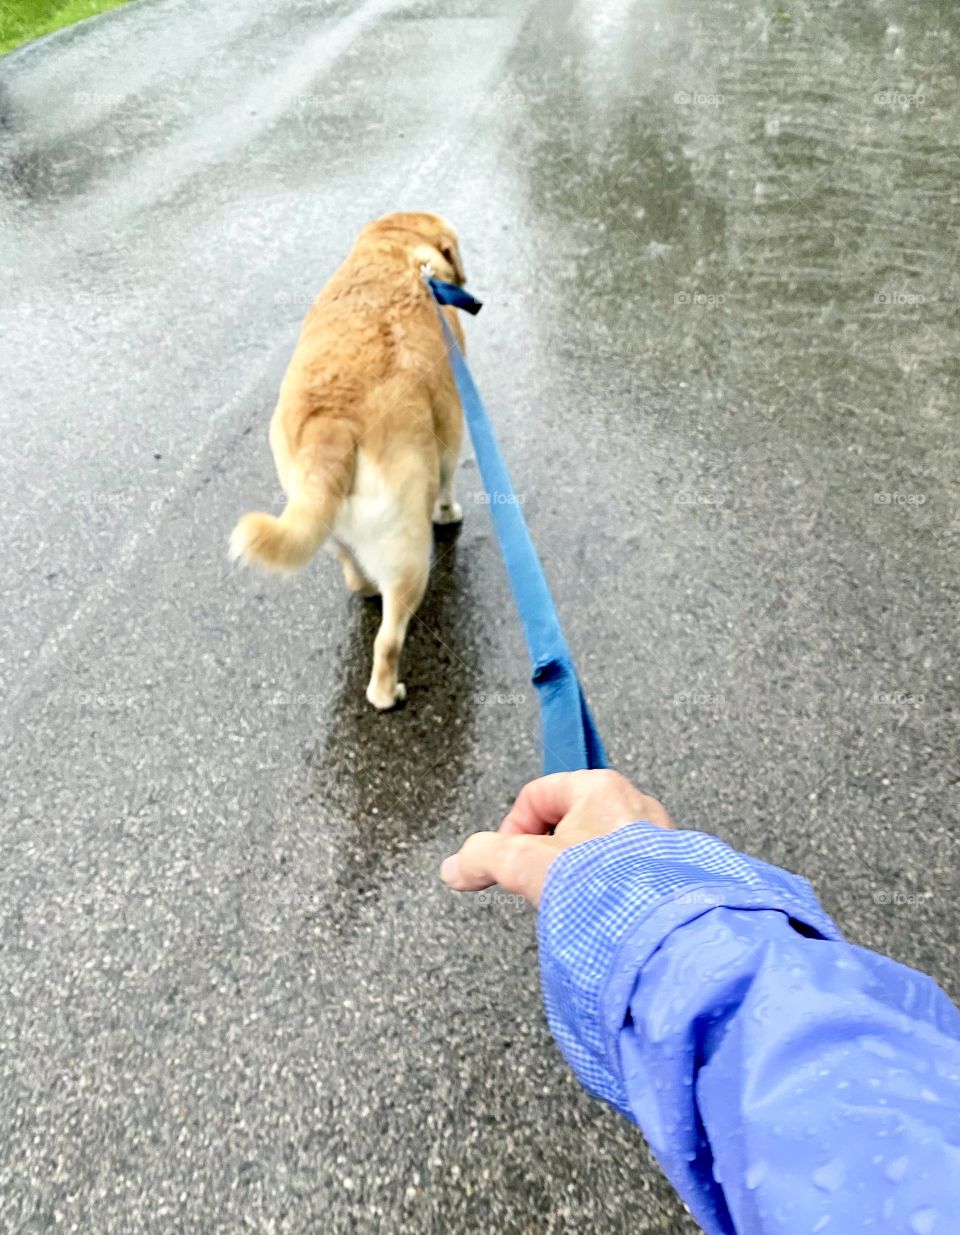 A yellow lab going for a walk in the rain